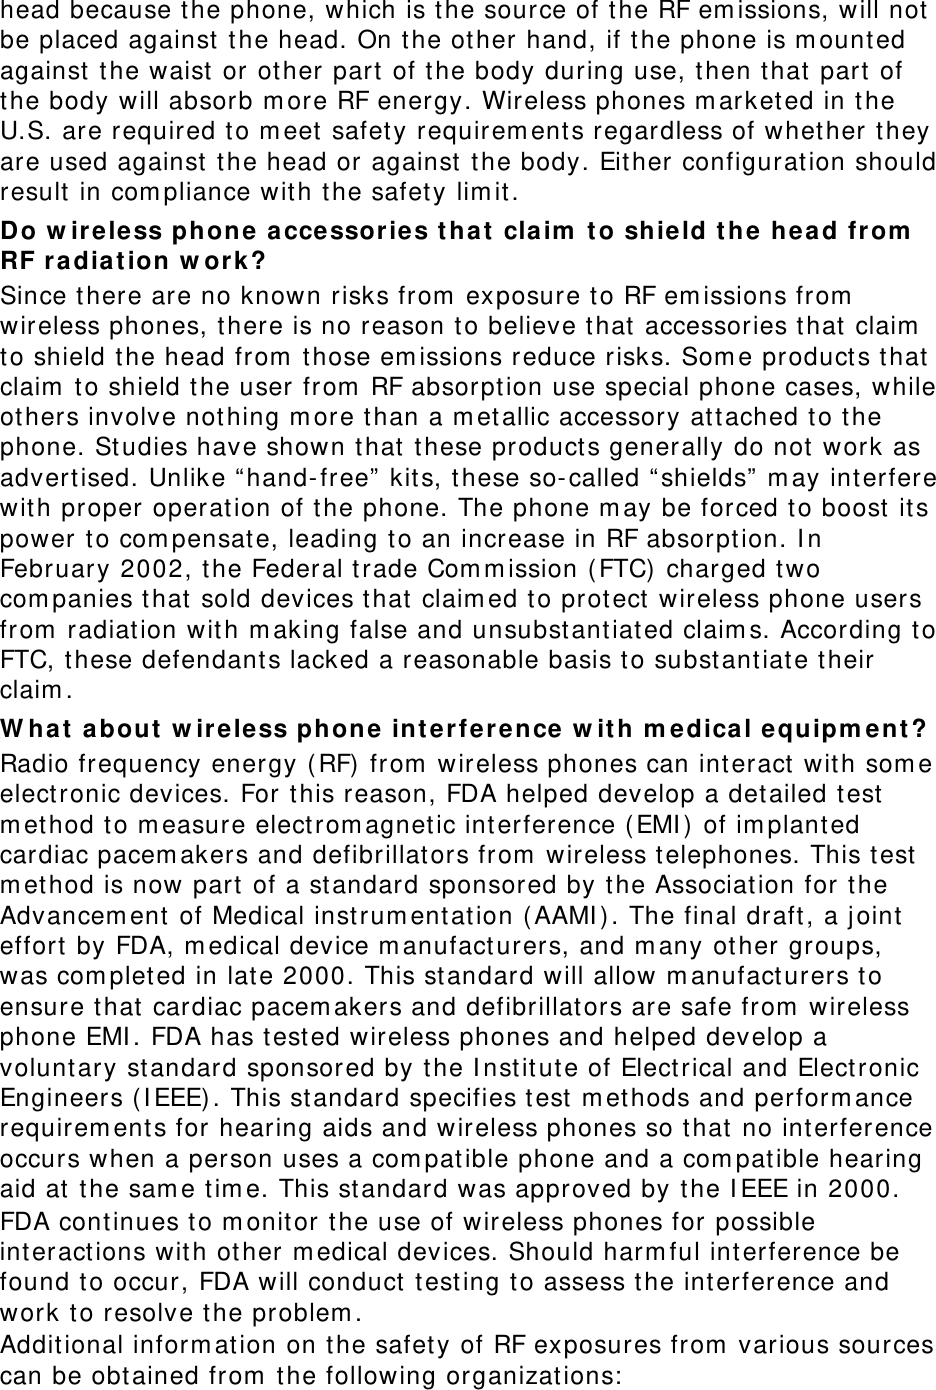 head because the phone, which is the source of the RF emissions, will not be placed against the head. On the other hand, if the phone is mounted against the waist or other part of the body during use, then that part of the body will absorb more RF energy. Wireless phones marketed in the U.S. are required to meet safety requirements regardless of whether they are used against the head or against the body. Either configuration should result in compliance with the safety limit. Do wireless phone accessories that claim to shield the head from RF radiation work? Since there are no known risks from exposure to RF emissions from wireless phones, there is no reason to believe that accessories that claim to shield the head from those emissions reduce risks. Some products that claim to shield the user from RF absorption use special phone cases, while others involve nothing more than a metallic accessory attached to the phone. Studies have shown that these products generally do not work as advertised. Unlike “hand-free” kits, these so-called “shields” may interfere with proper operation of the phone. The phone may be forced to boost its power to compensate, leading to an increase in RF absorption. In February 2002, the Federal trade Commission (FTC) charged two companies that sold devices that claimed to protect wireless phone users from radiation with making false and unsubstantiated claims. According to FTC, these defendants lacked a reasonable basis to substantiate their claim. What about wireless phone interference with medical equipment? Radio frequency energy (RF) from wireless phones can interact with some electronic devices. For this reason, FDA helped develop a detailed test method to measure electromagnetic interference (EMI) of implanted cardiac pacemakers and defibrillators from wireless telephones. This test method is now part of a standard sponsored by the Association for the Advancement of Medical instrumentation (AAMI). The final draft, a joint effort by FDA, medical device manufacturers, and many other groups, was completed in late 2000. This standard will allow manufacturers to ensure that cardiac pacemakers and defibrillators are safe from wireless phone EMI. FDA has tested wireless phones and helped develop a voluntary standard sponsored by the Institute of Electrical and Electronic Engineers (IEEE). This standard specifies test methods and performance requirements for hearing aids and wireless phones so that no interference occurs when a person uses a compatible phone and a compatible hearing aid at the same time. This standard was approved by the IEEE in 2000. FDA continues to monitor the use of wireless phones for possible interactions with other medical devices. Should harmful interference be found to occur, FDA will conduct testing to assess the interference and work to resolve the problem. Additional information on the safety of RF exposures from various sources can be obtained from the following organizations: 